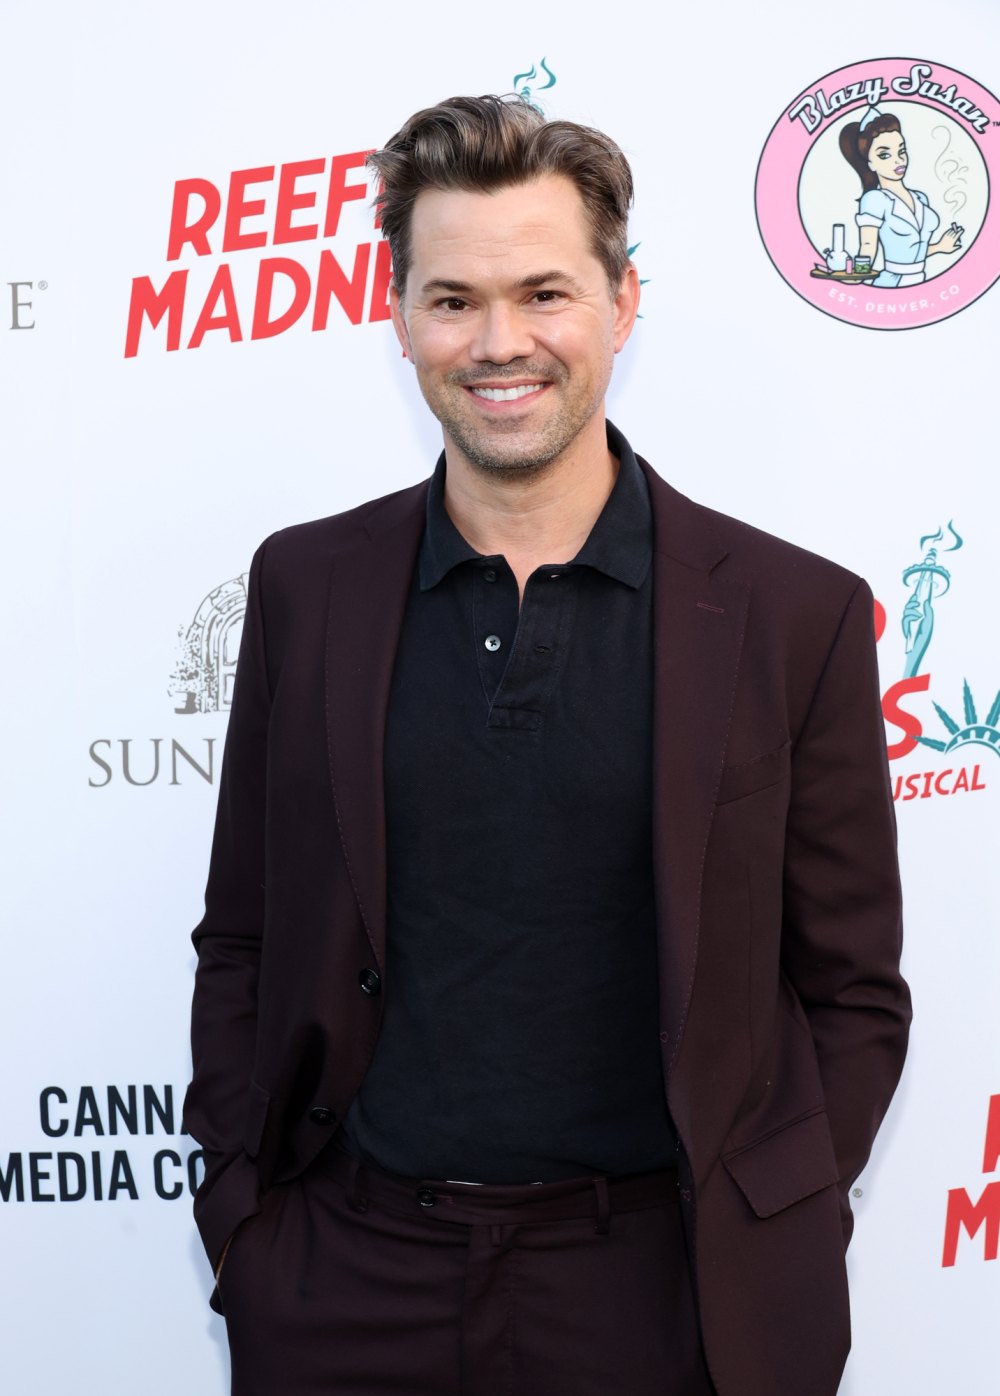 Andrew Rannells Is Very Sad to Drop Out of Broadway Tammy Faye